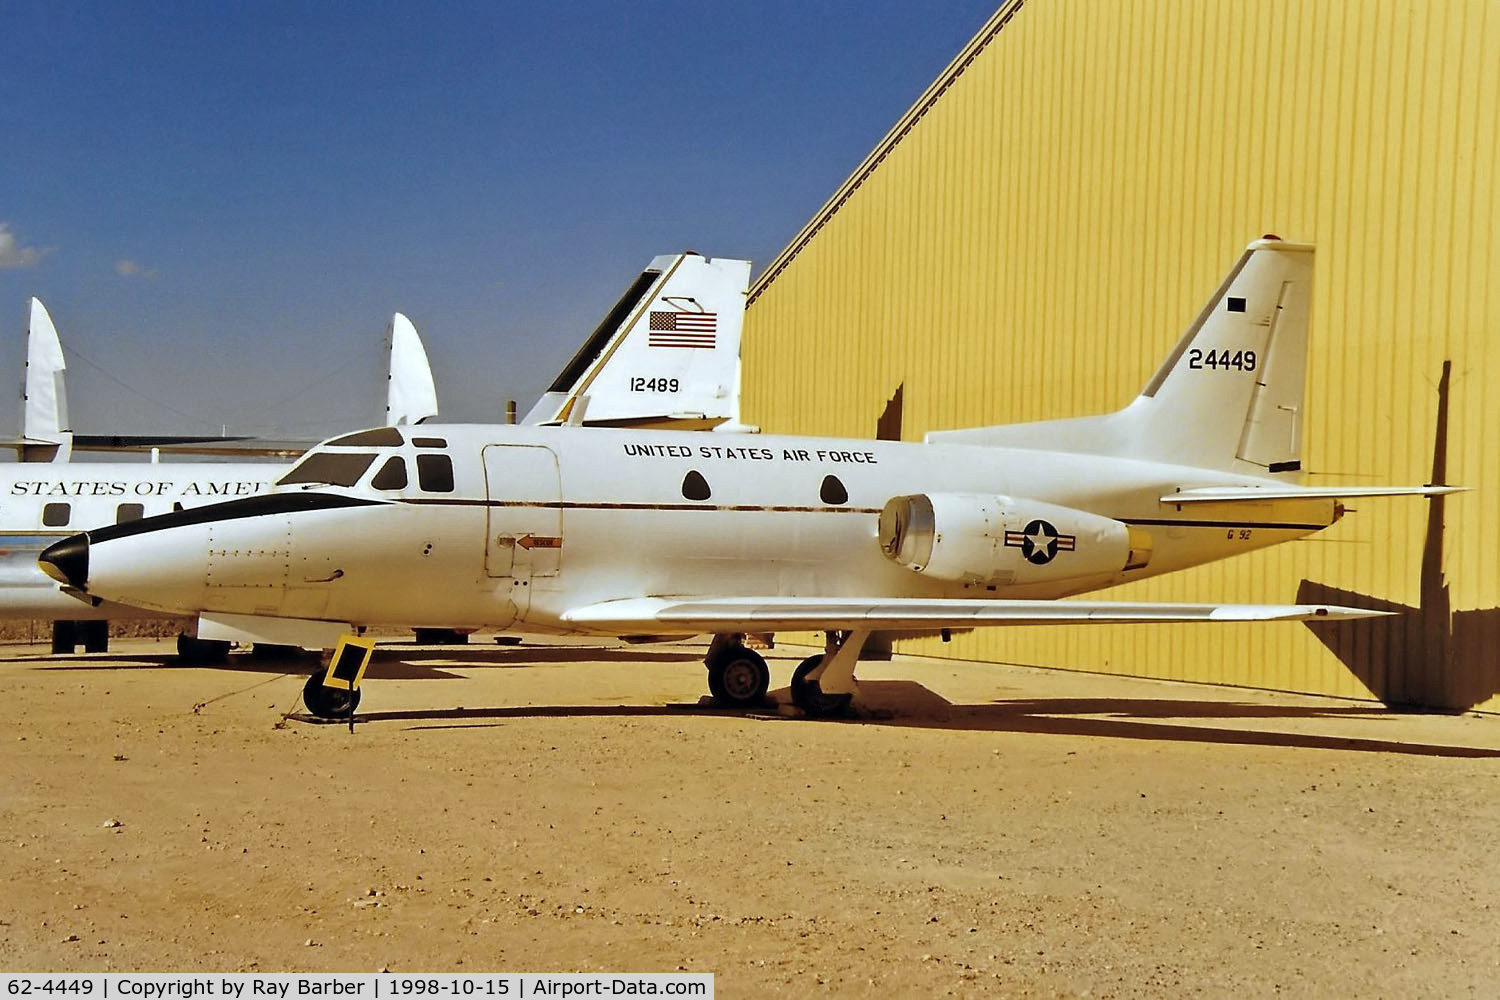 62-4449, 1962 North American CT-39A Sabreliner C/N 276-2, Rockwell CT-39A Sabreliner [276-2] (United States Air Force) Tucson-Pima Air and Space Museum~N 15/10/1998